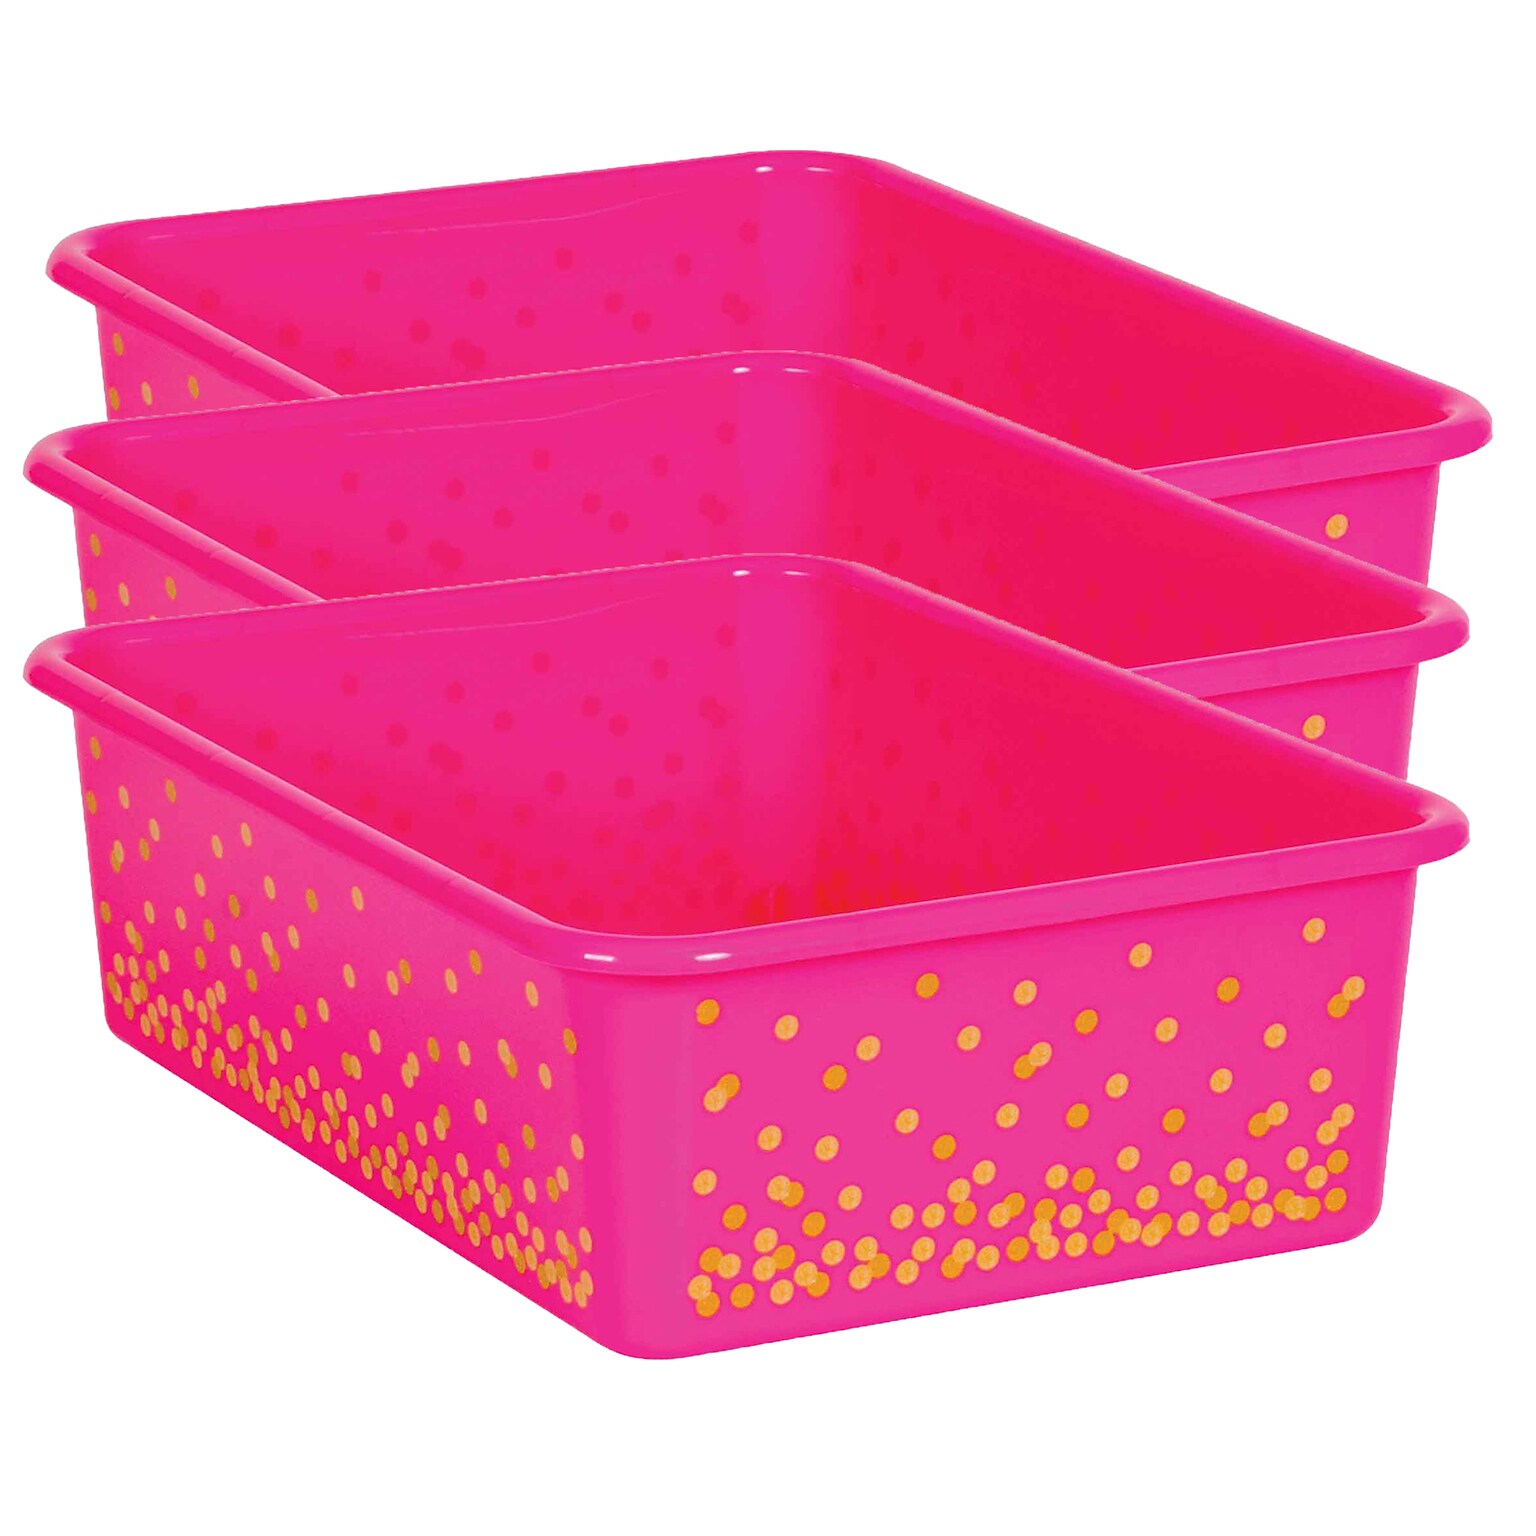 Teacher Created Resources Plastic Storage Bin, Large, 11.5 x 16.25 x 5, Pink Confetti, Pack of 3 (TCR20898-3)